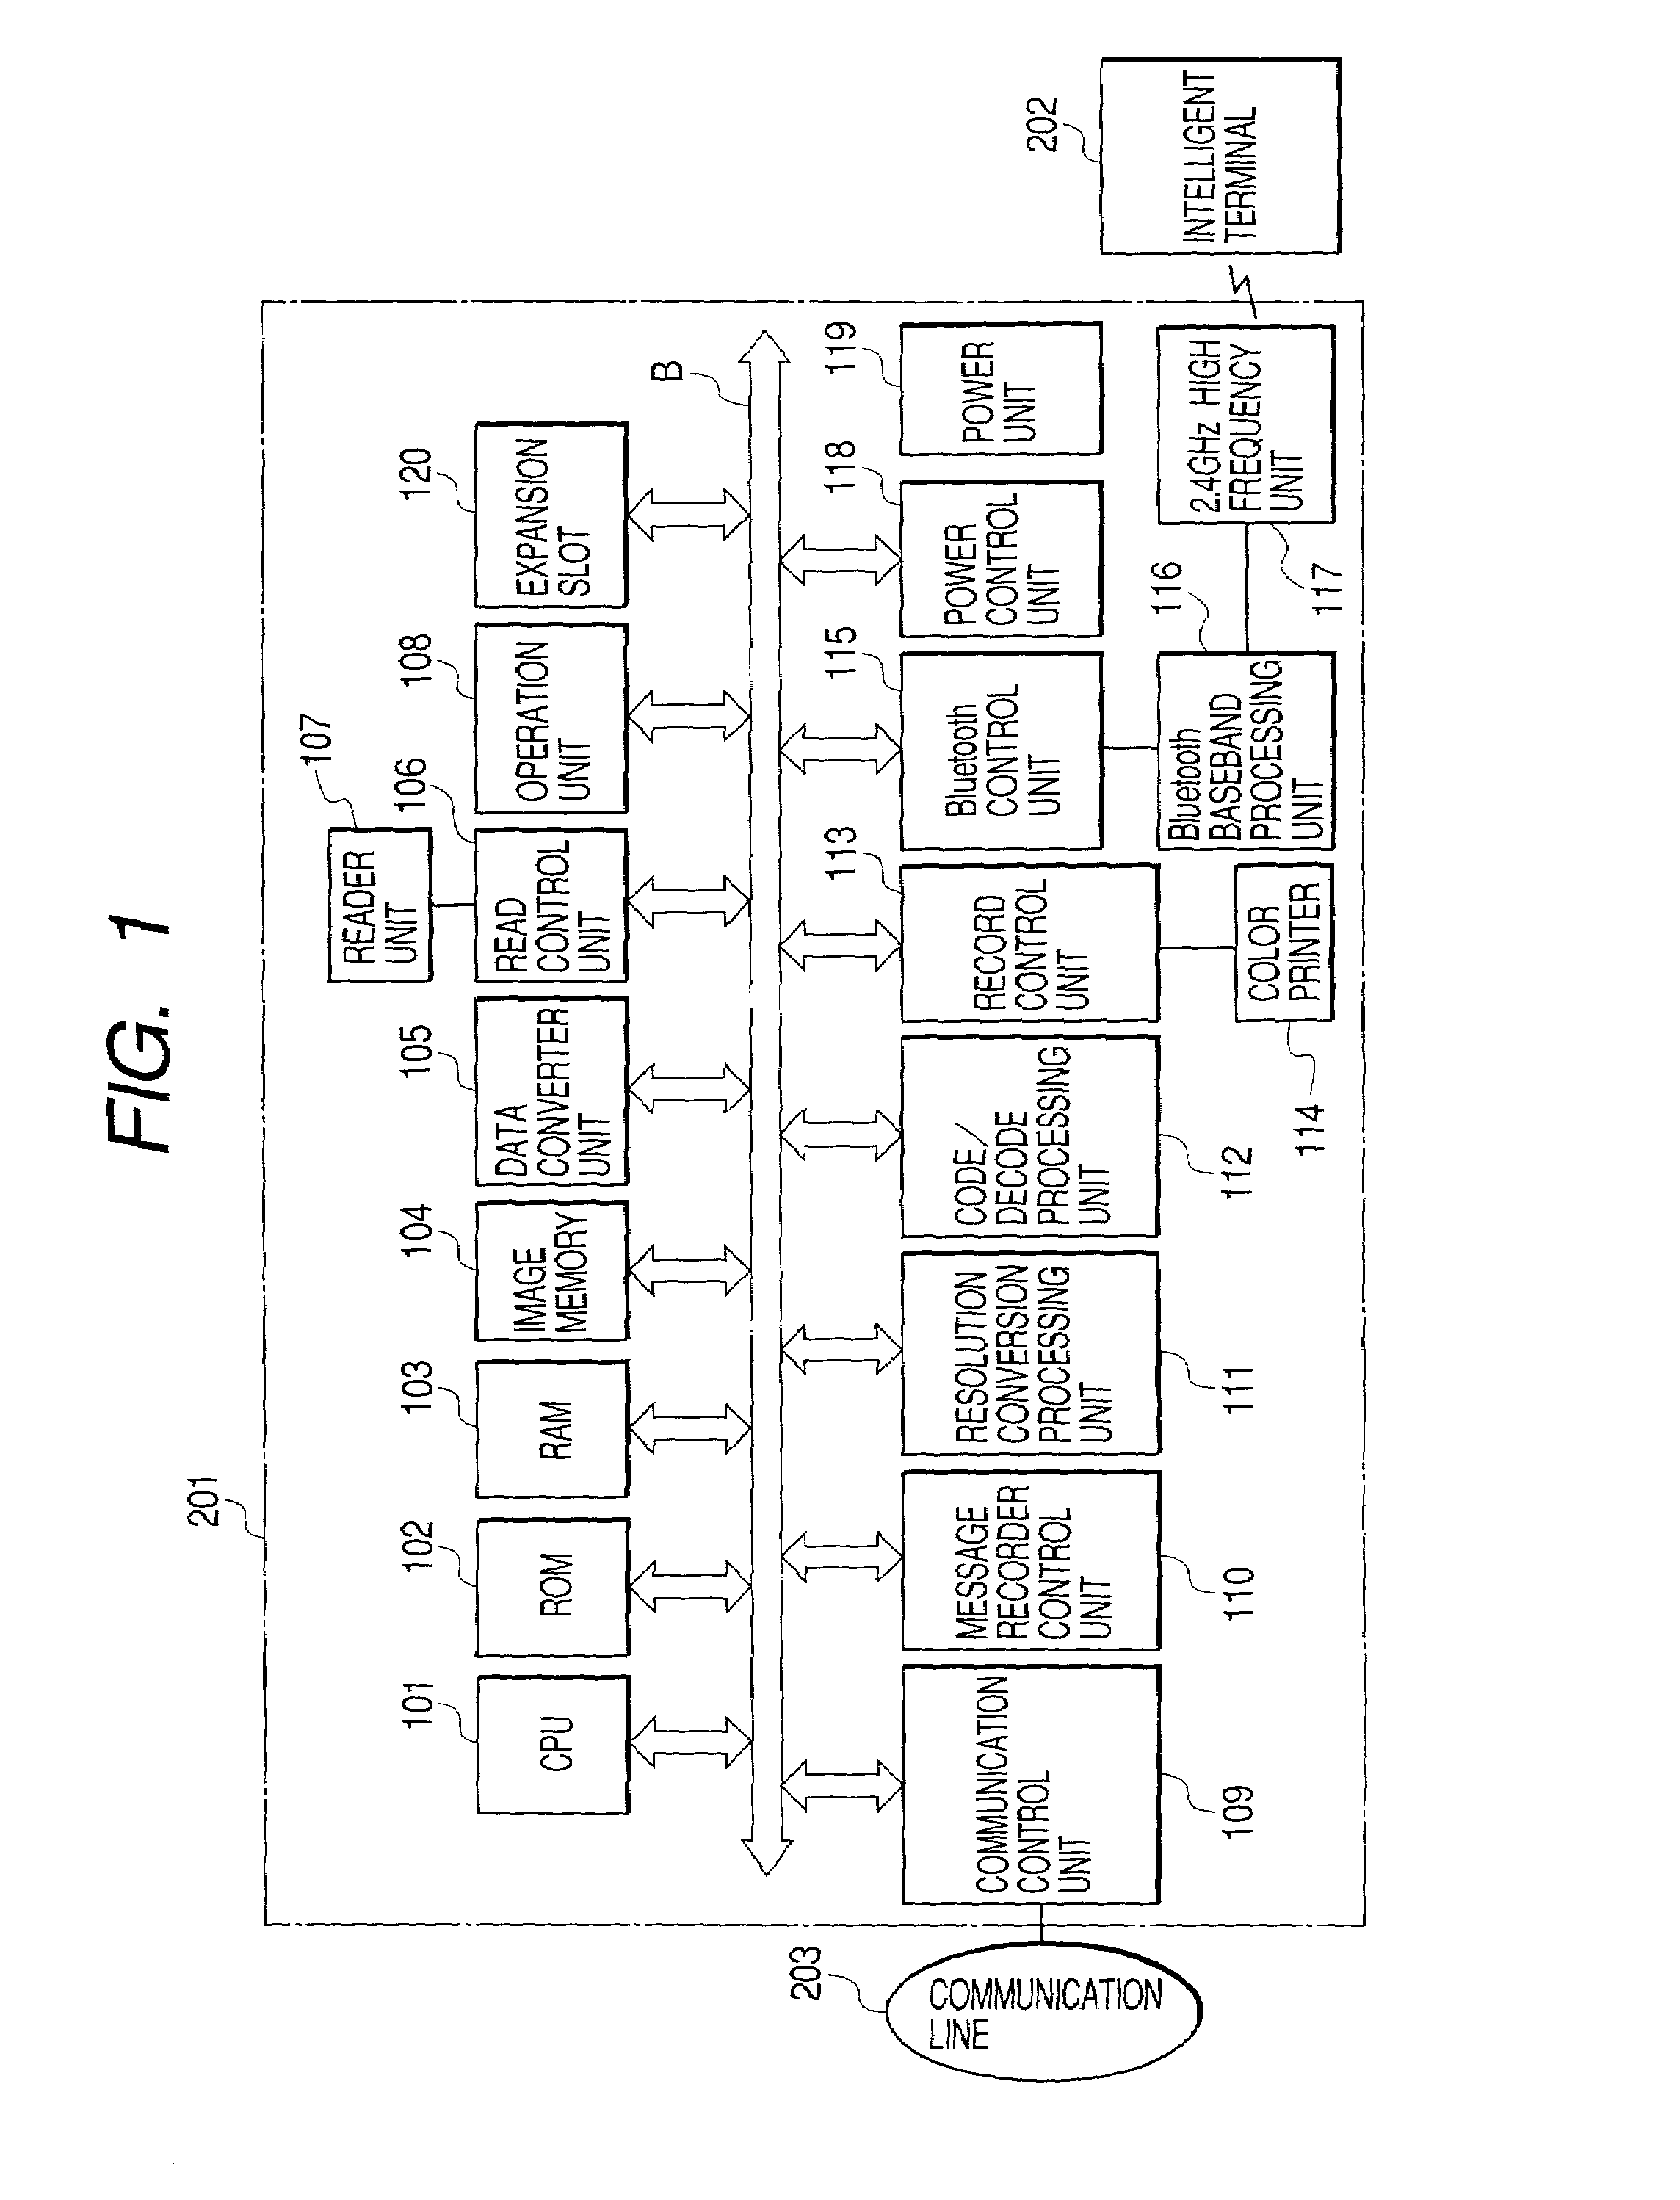 Apparatus with communication function, method of controlling apparatus, and storage medium storing program for controlling apparatus